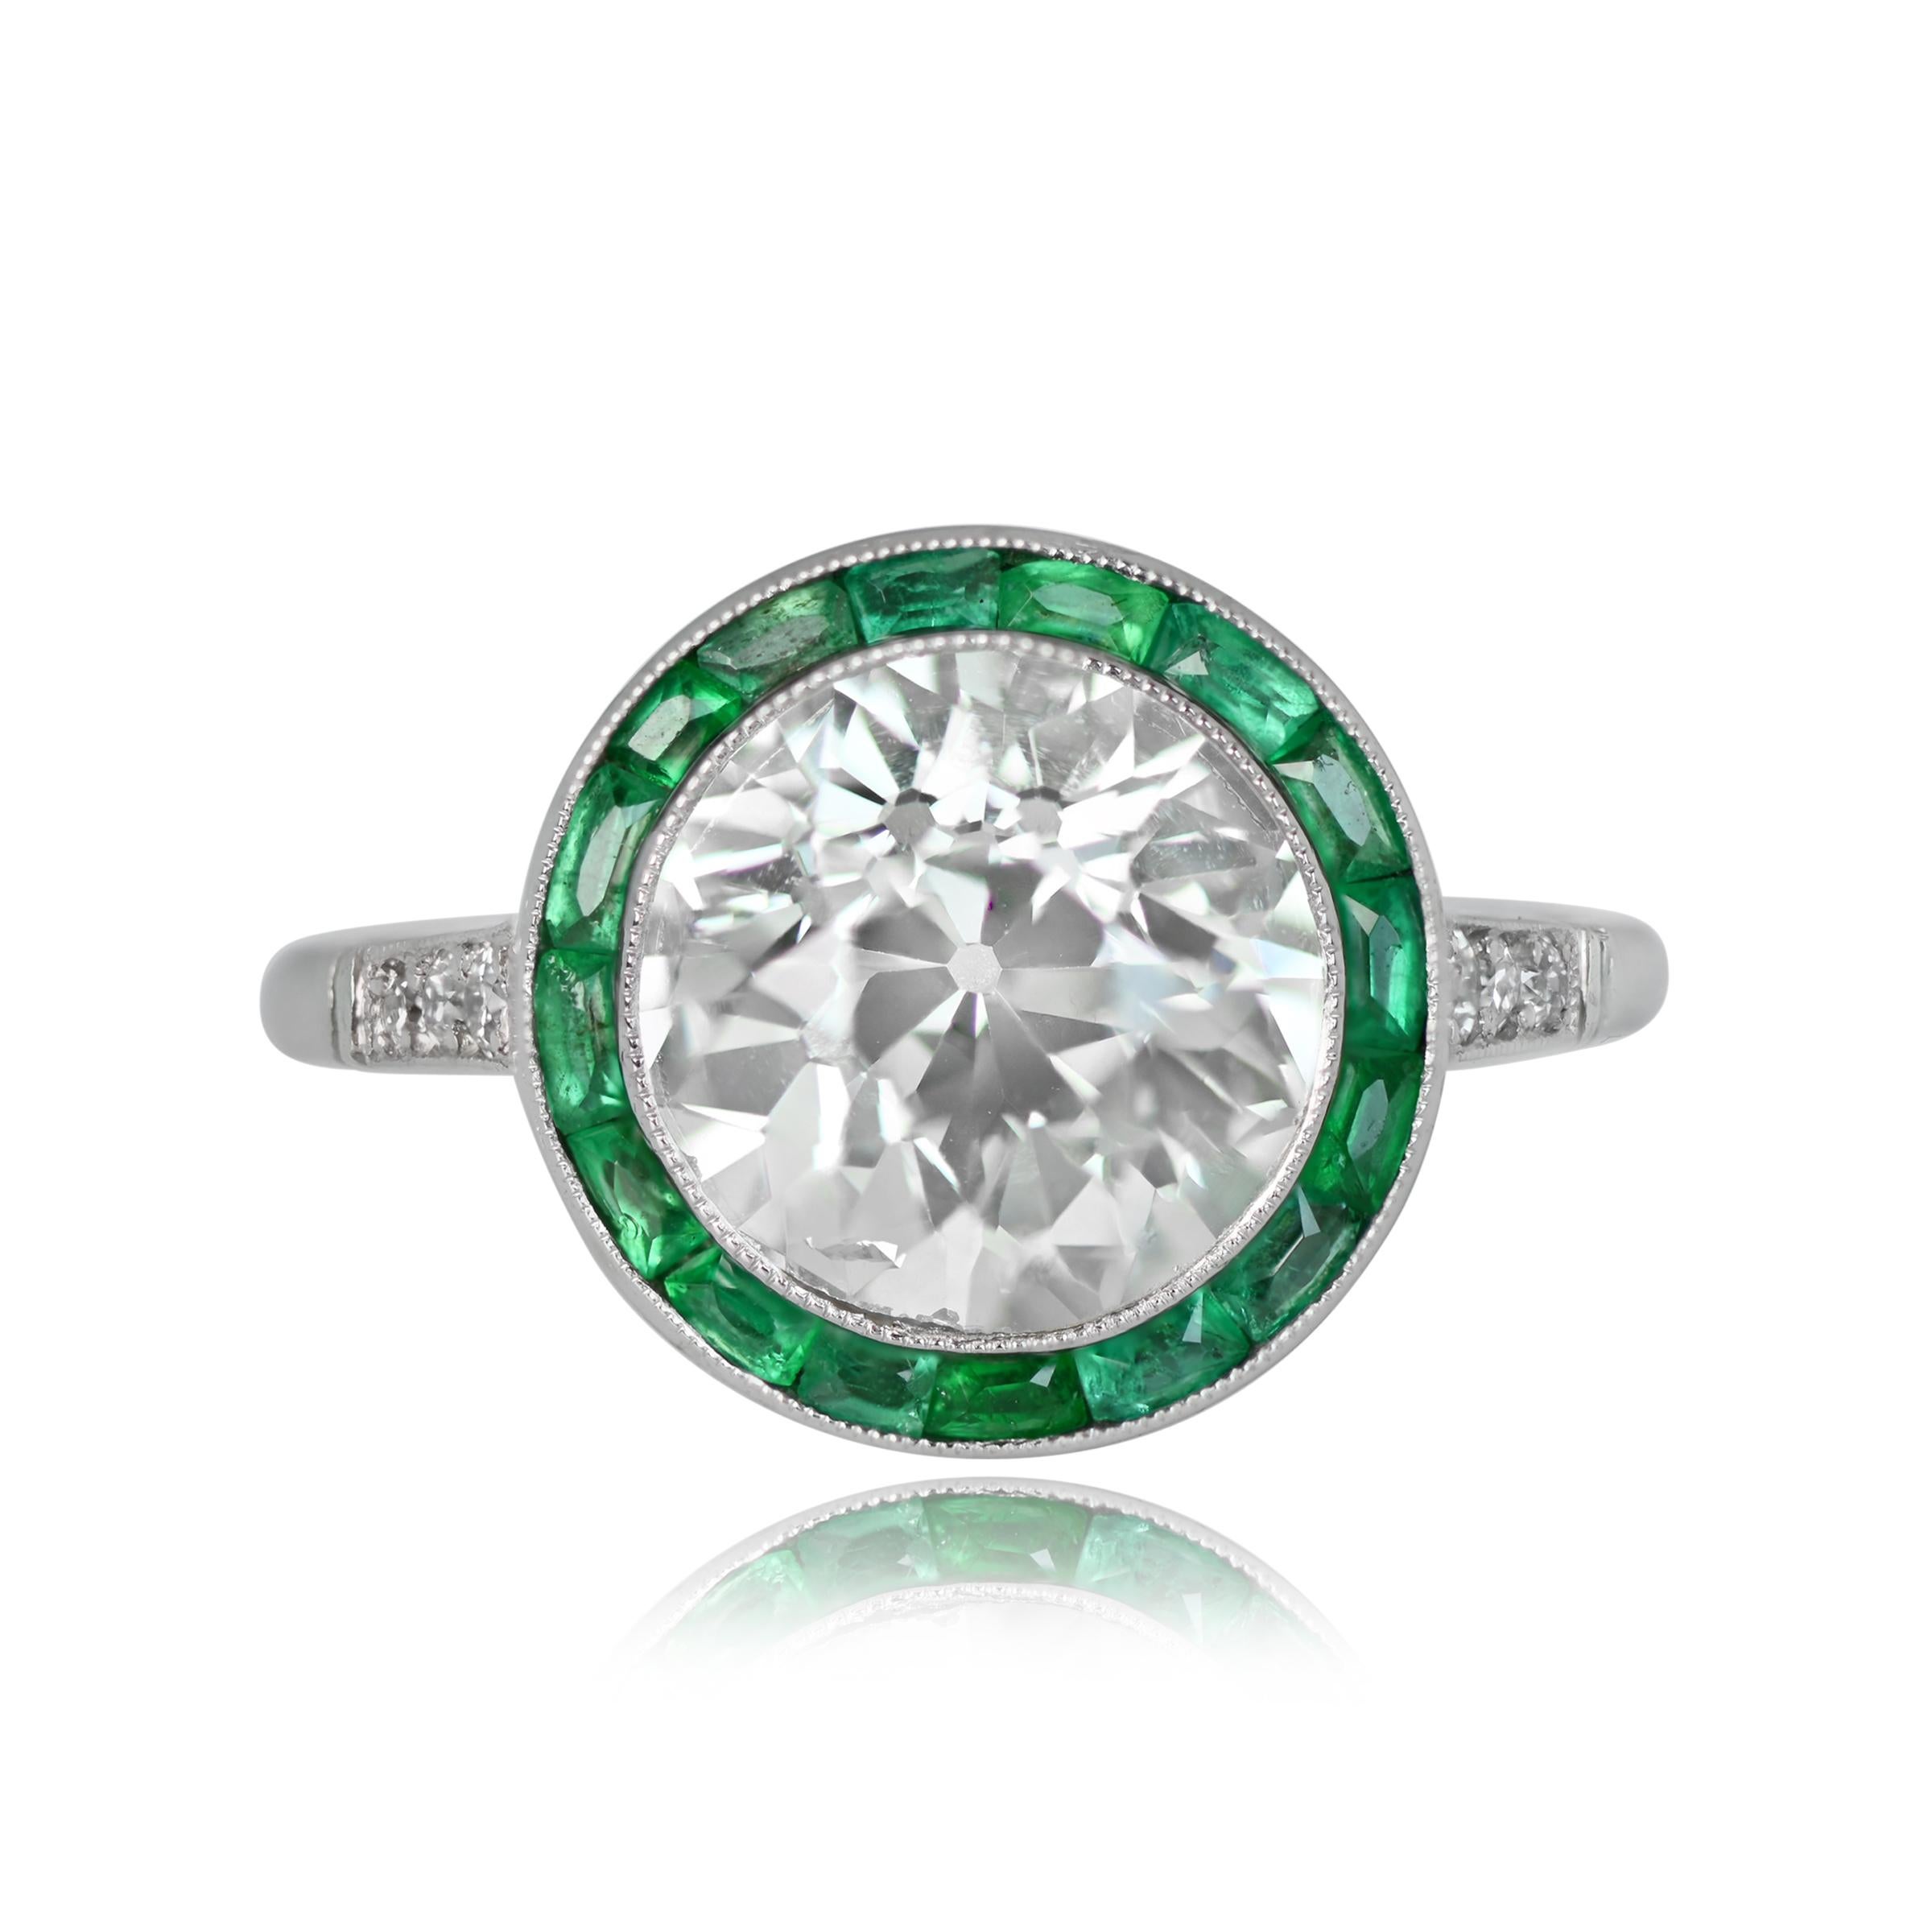 Art Deco-style platinum engagement ring with 2.70ct L color, VS2 clarity old European cut diamond. Halo of calibre natural green emeralds, three round pave set diamonds on each shoulder, and fine open-work and filigree under gallery.

Ring Size: 6.5